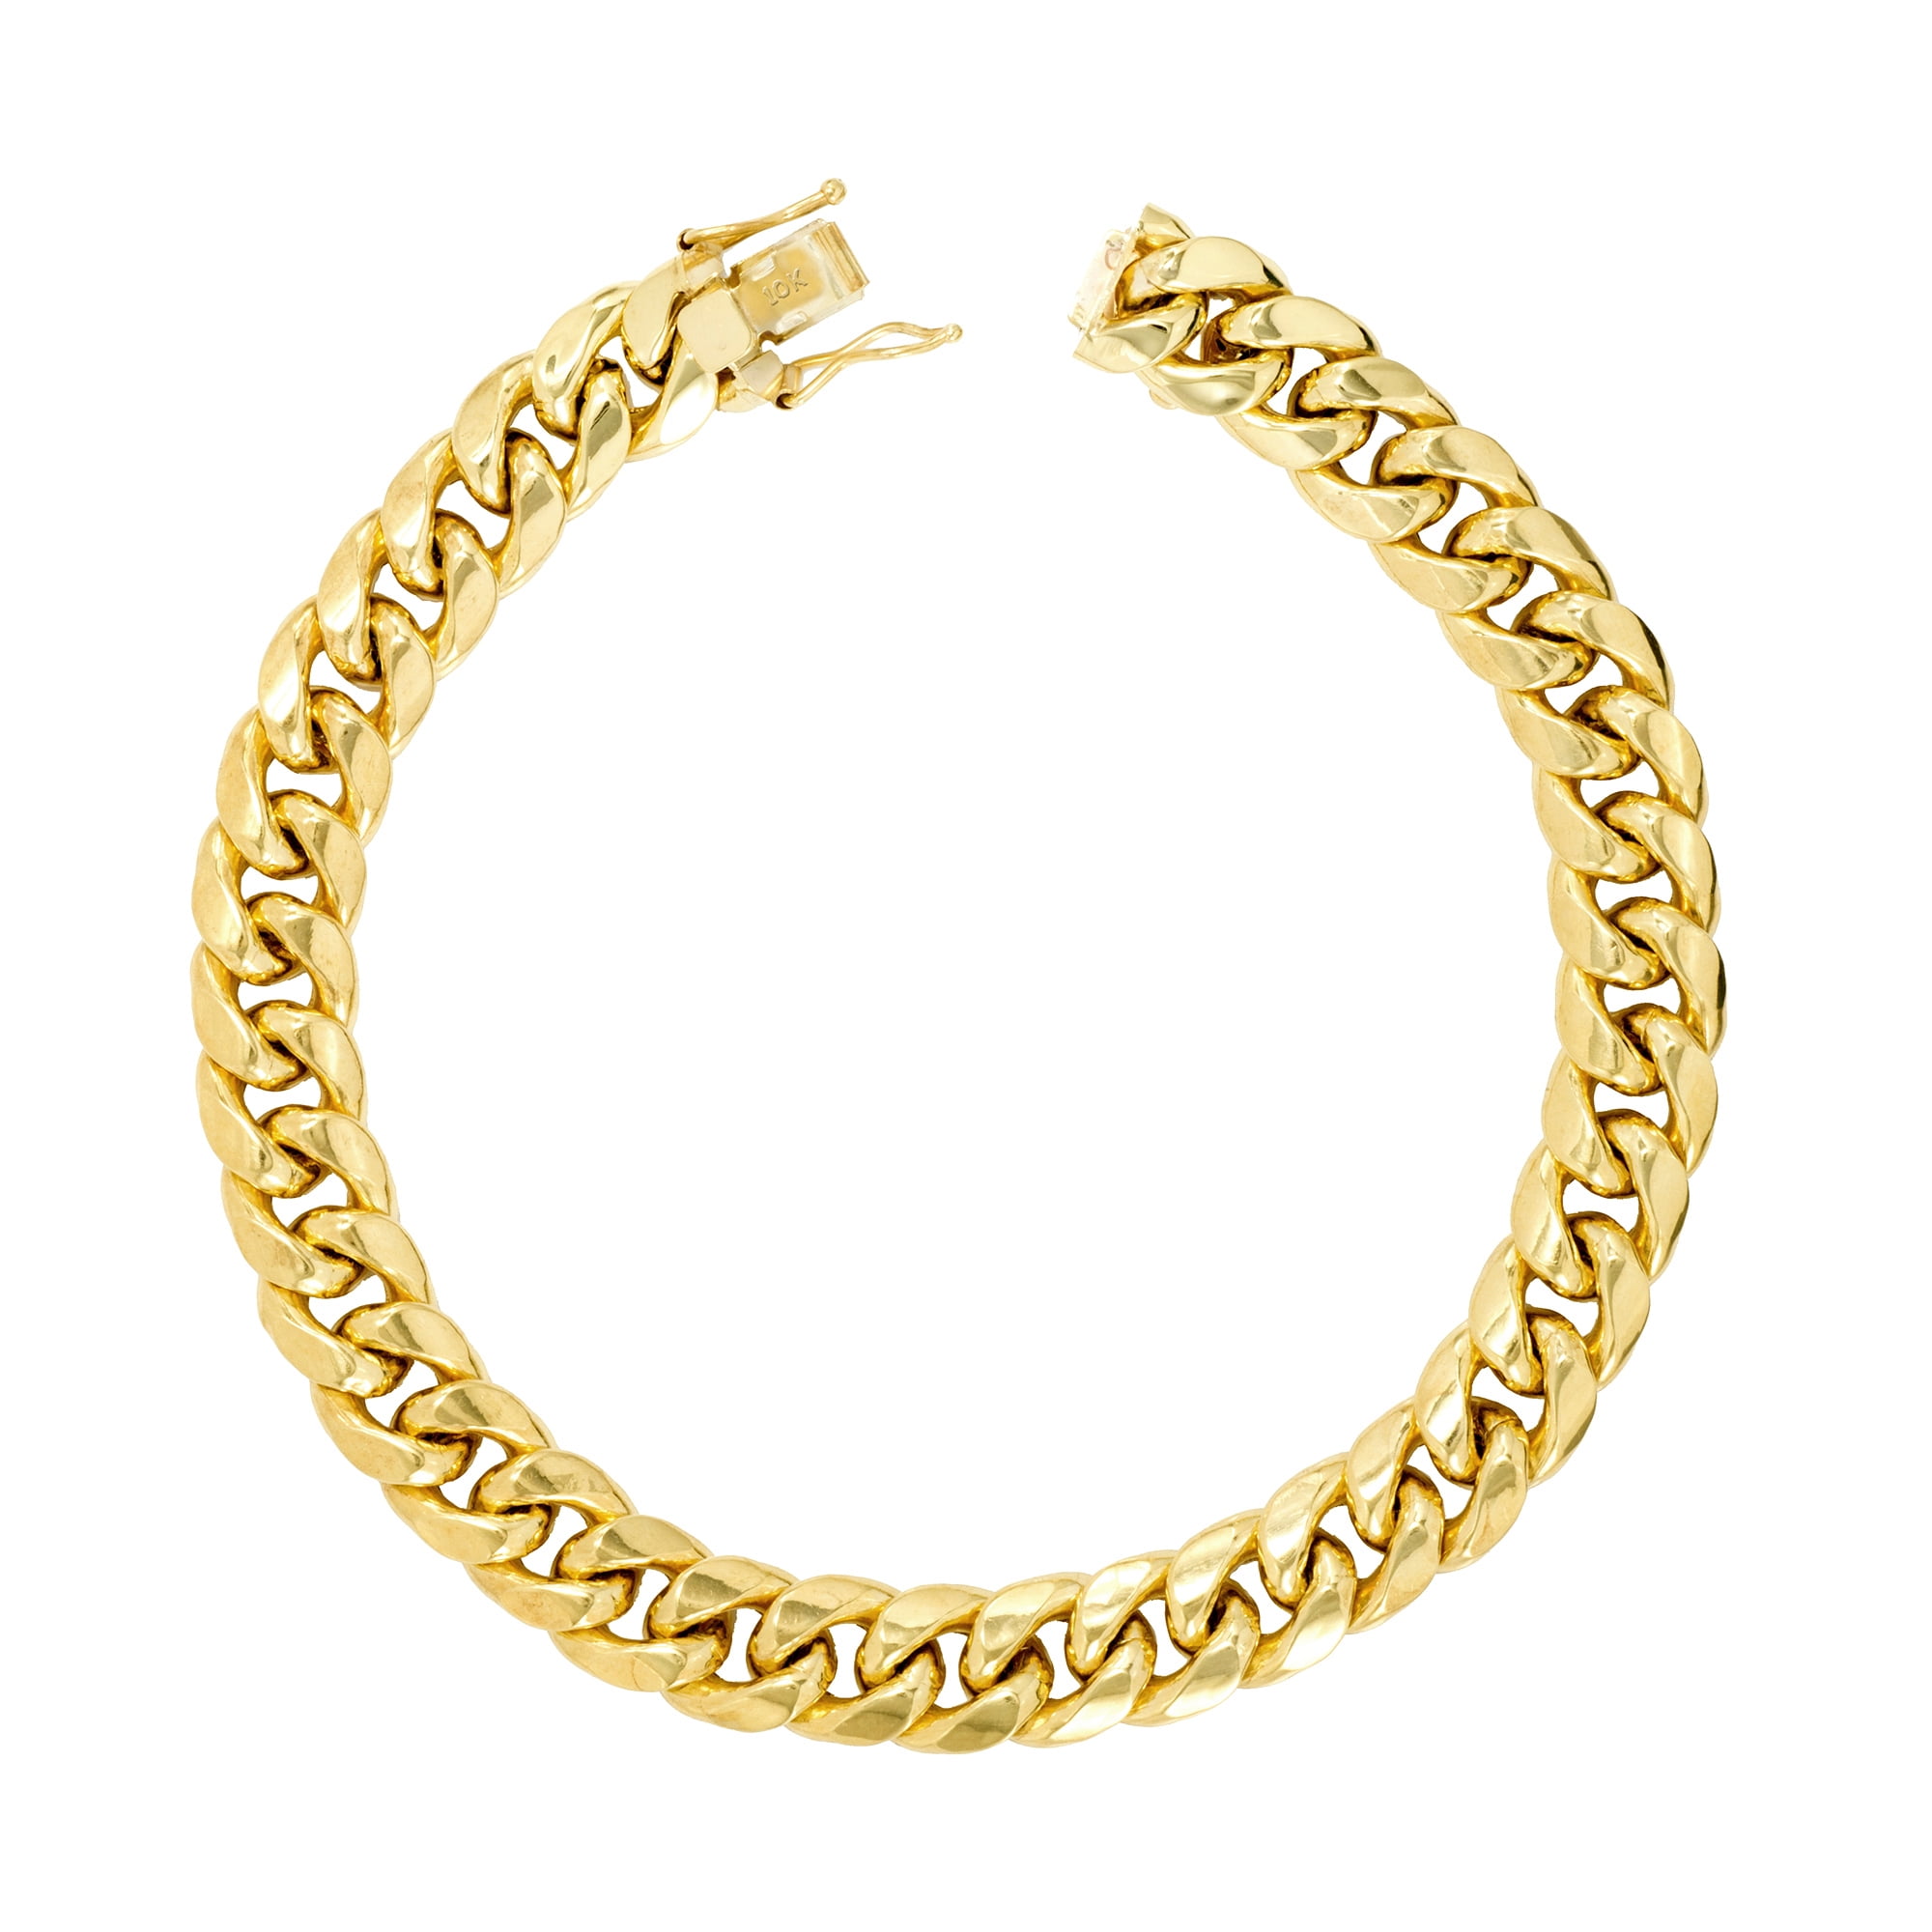 7.5mm with Secure Lobster Lock Clasp Solid 14k Yellow Gold Medical Soft Diamond-Shape Red Enamel Figaro ID Bracelet